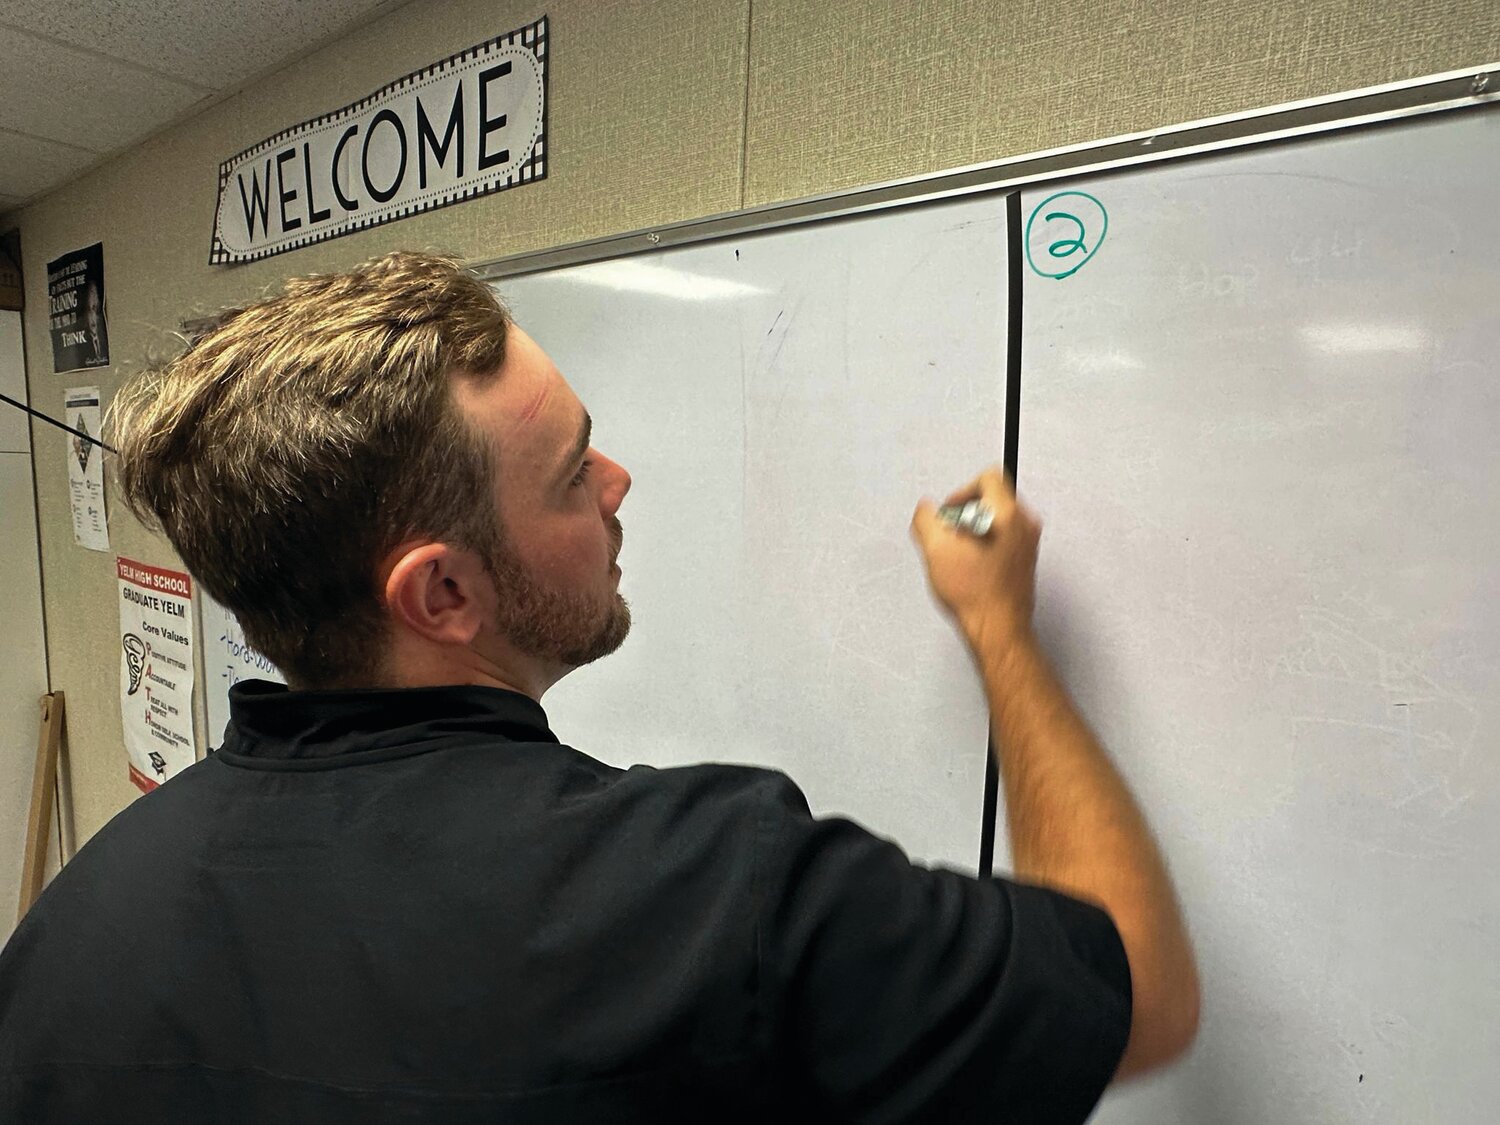 New Yelm High School teacher Dakota Hill prepares his classroom for the first day of school on Sept. 4.